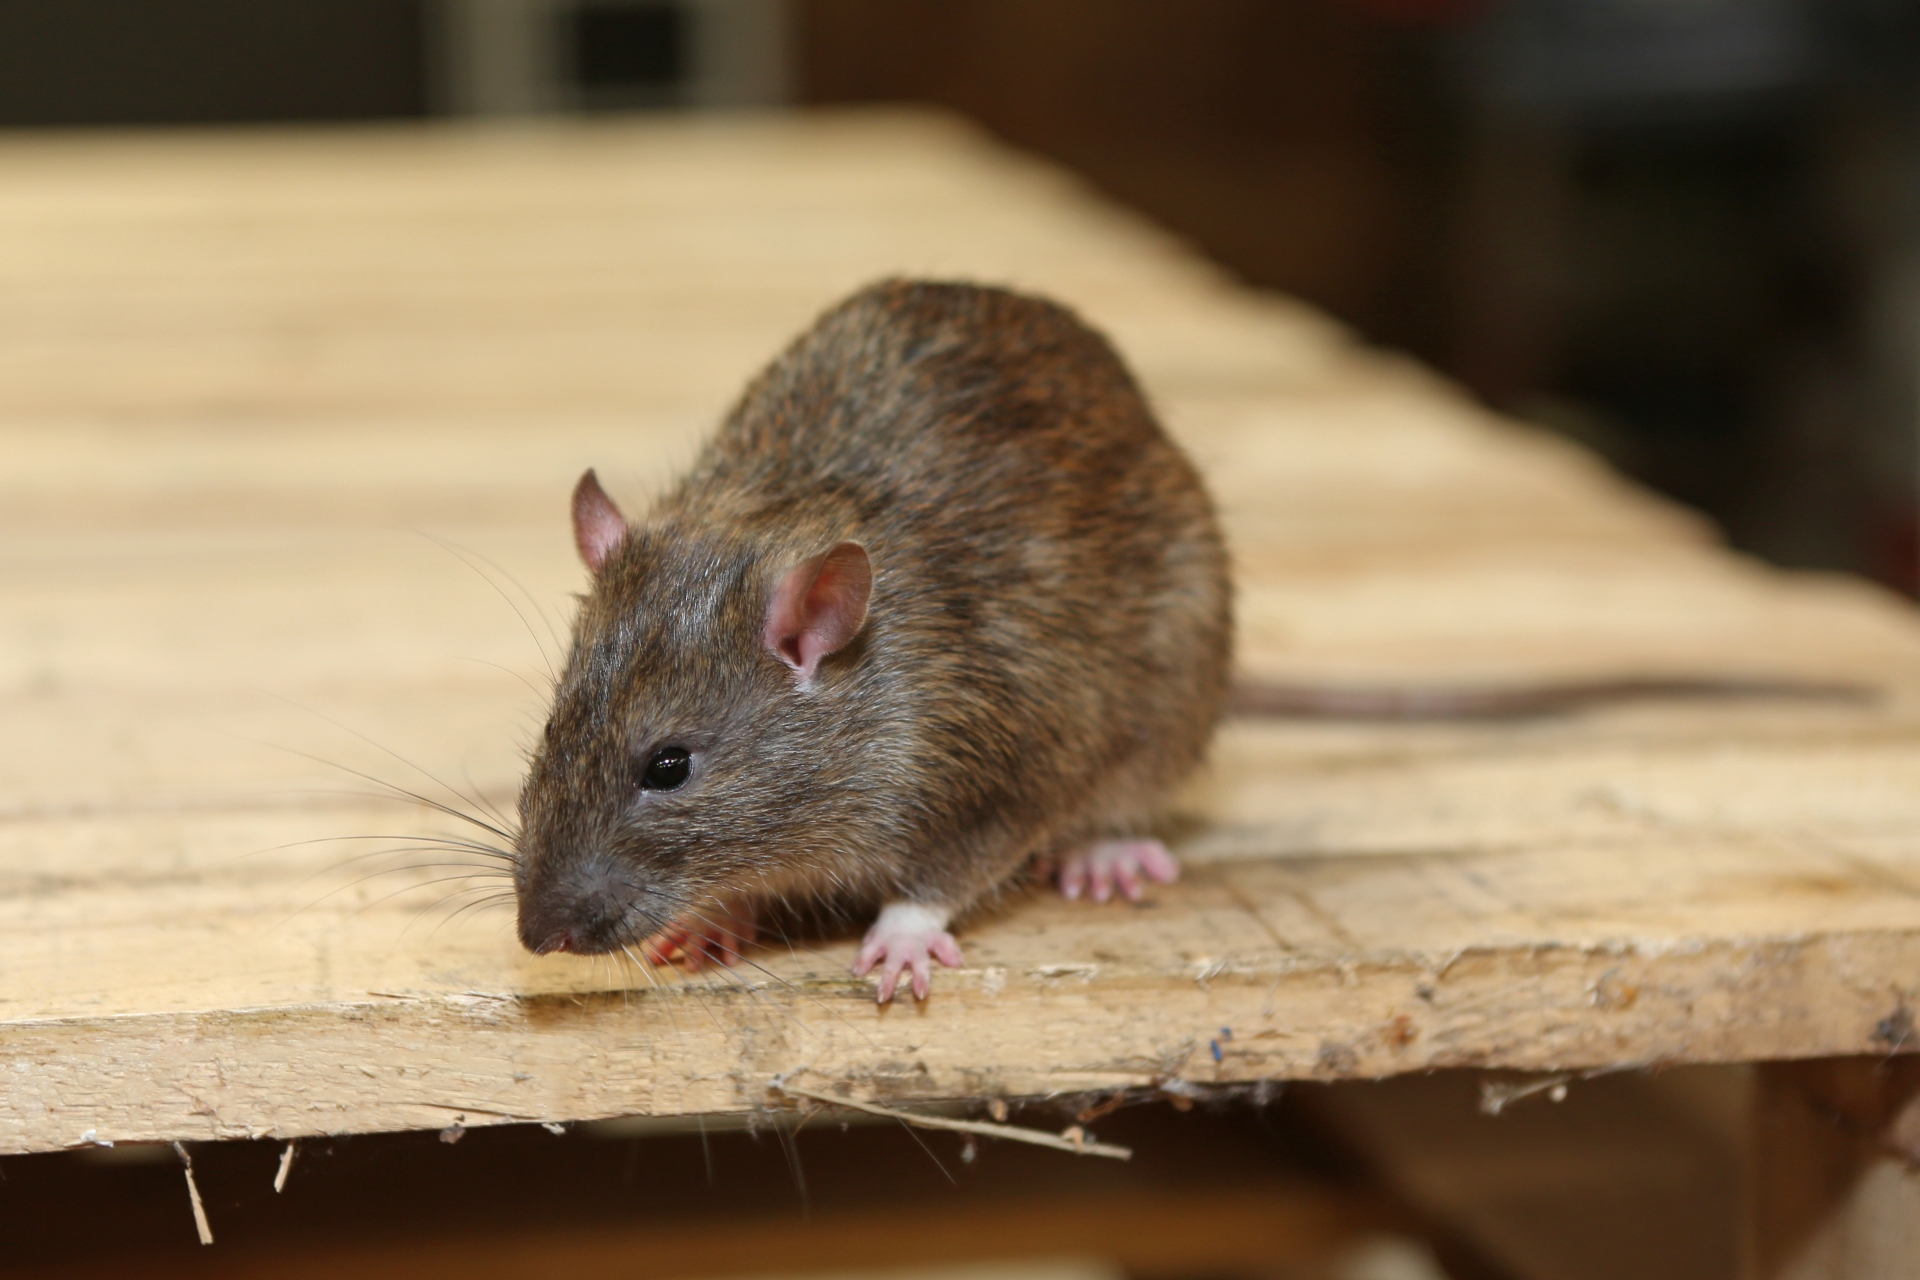 Rat Control, Pest Control in Mile End, Stepney, E1. Call Now 020 8166 9746